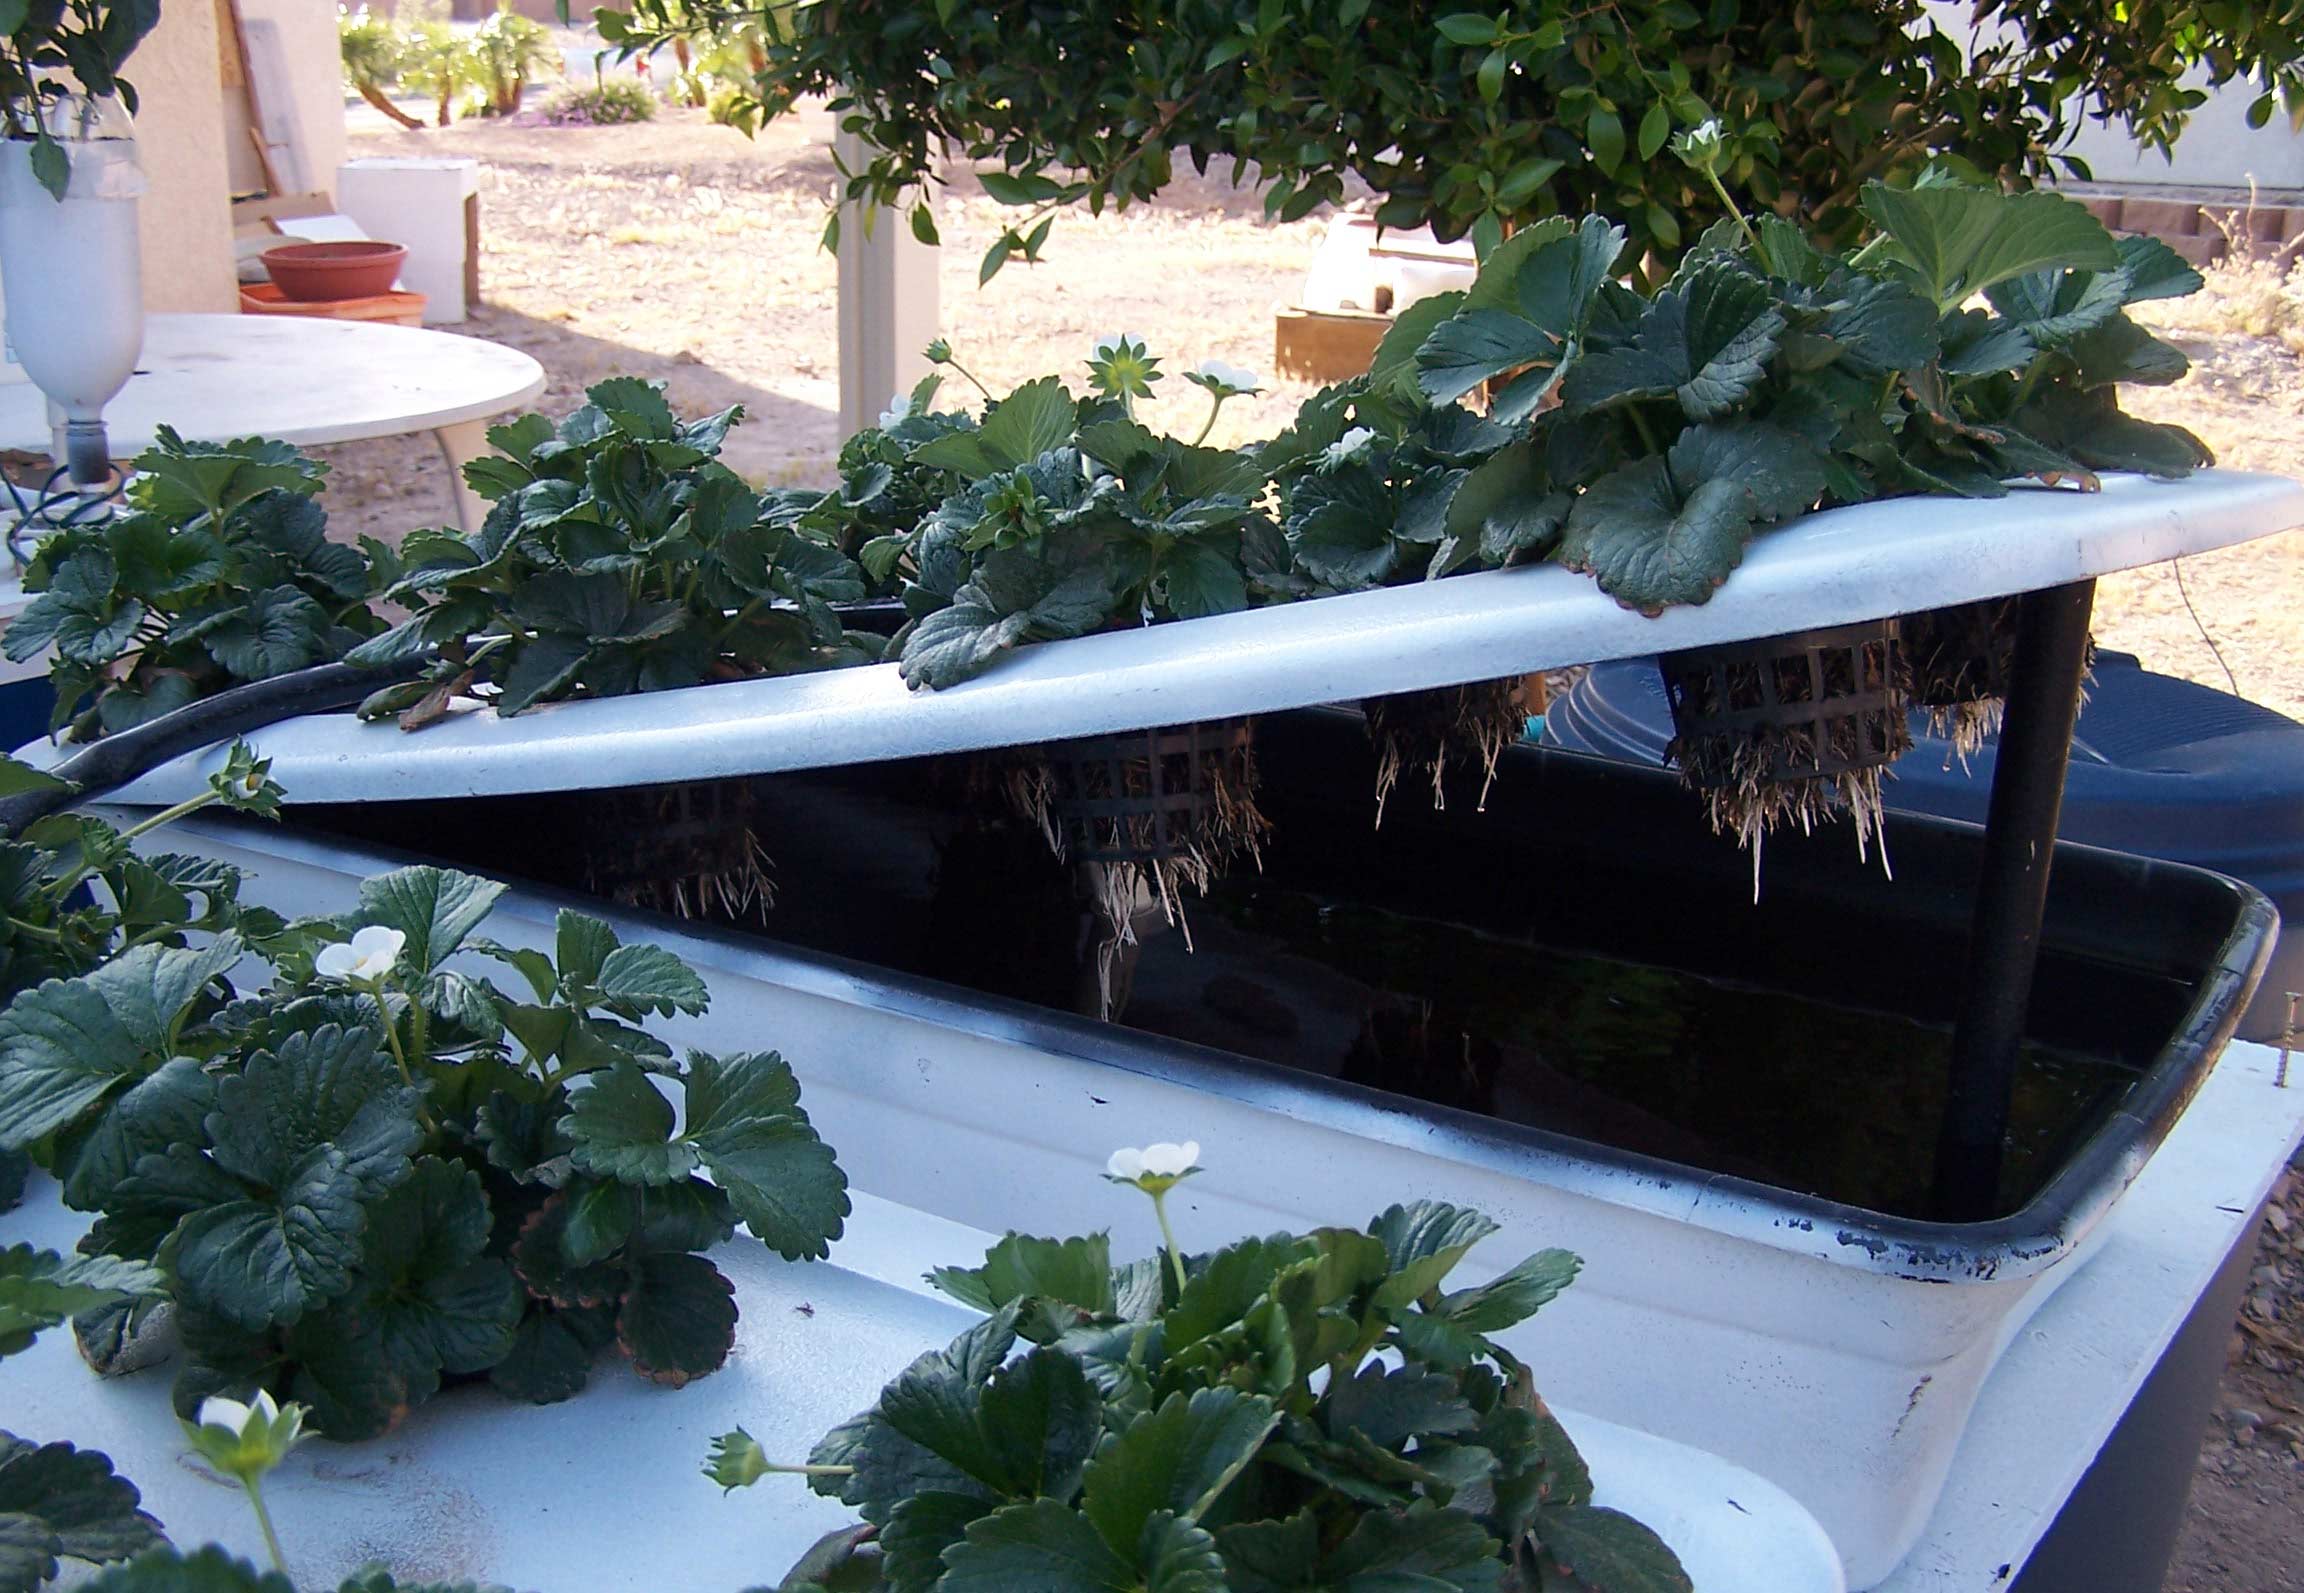 Basic Hydroponic Systems and How They Work